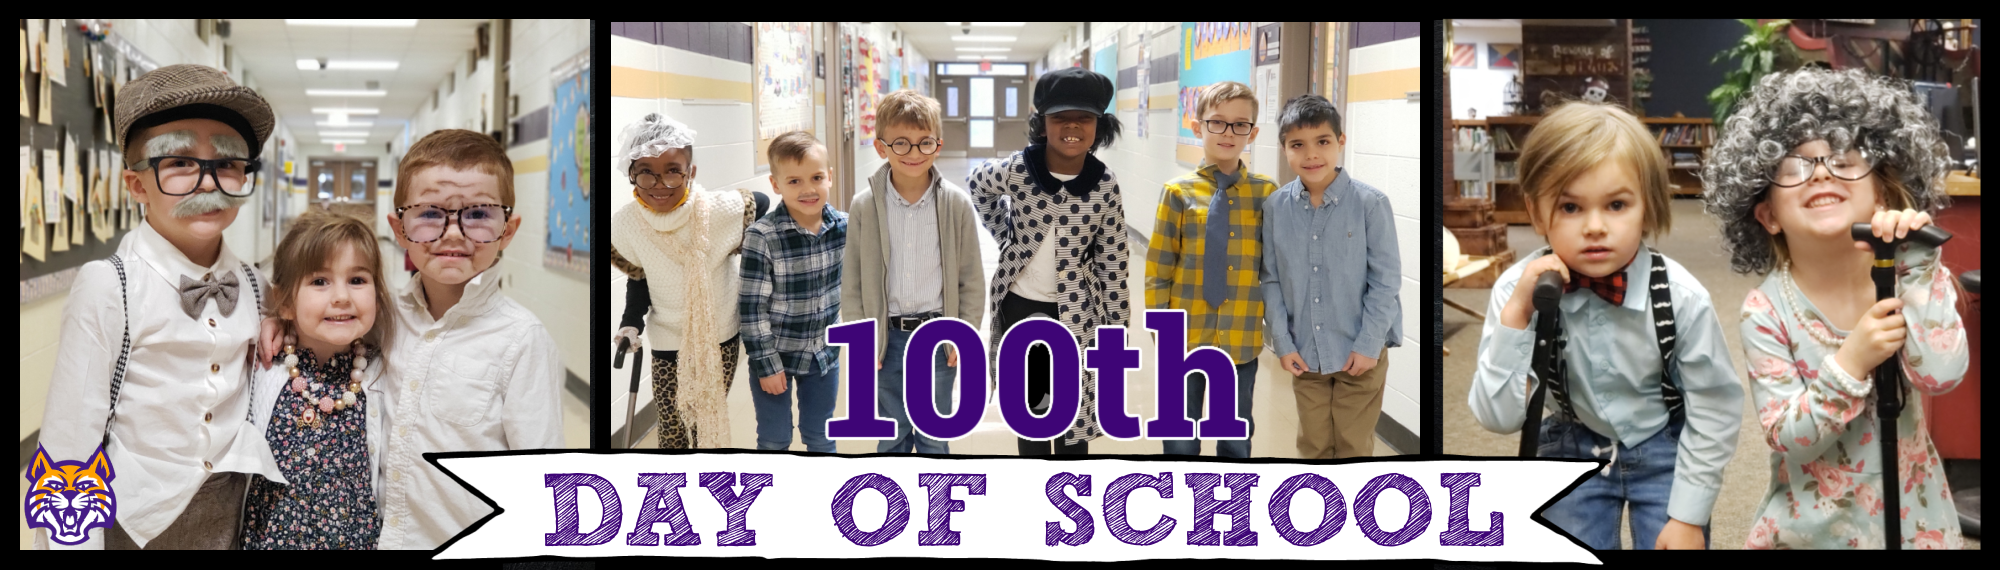 students dressed up for 100th day of school